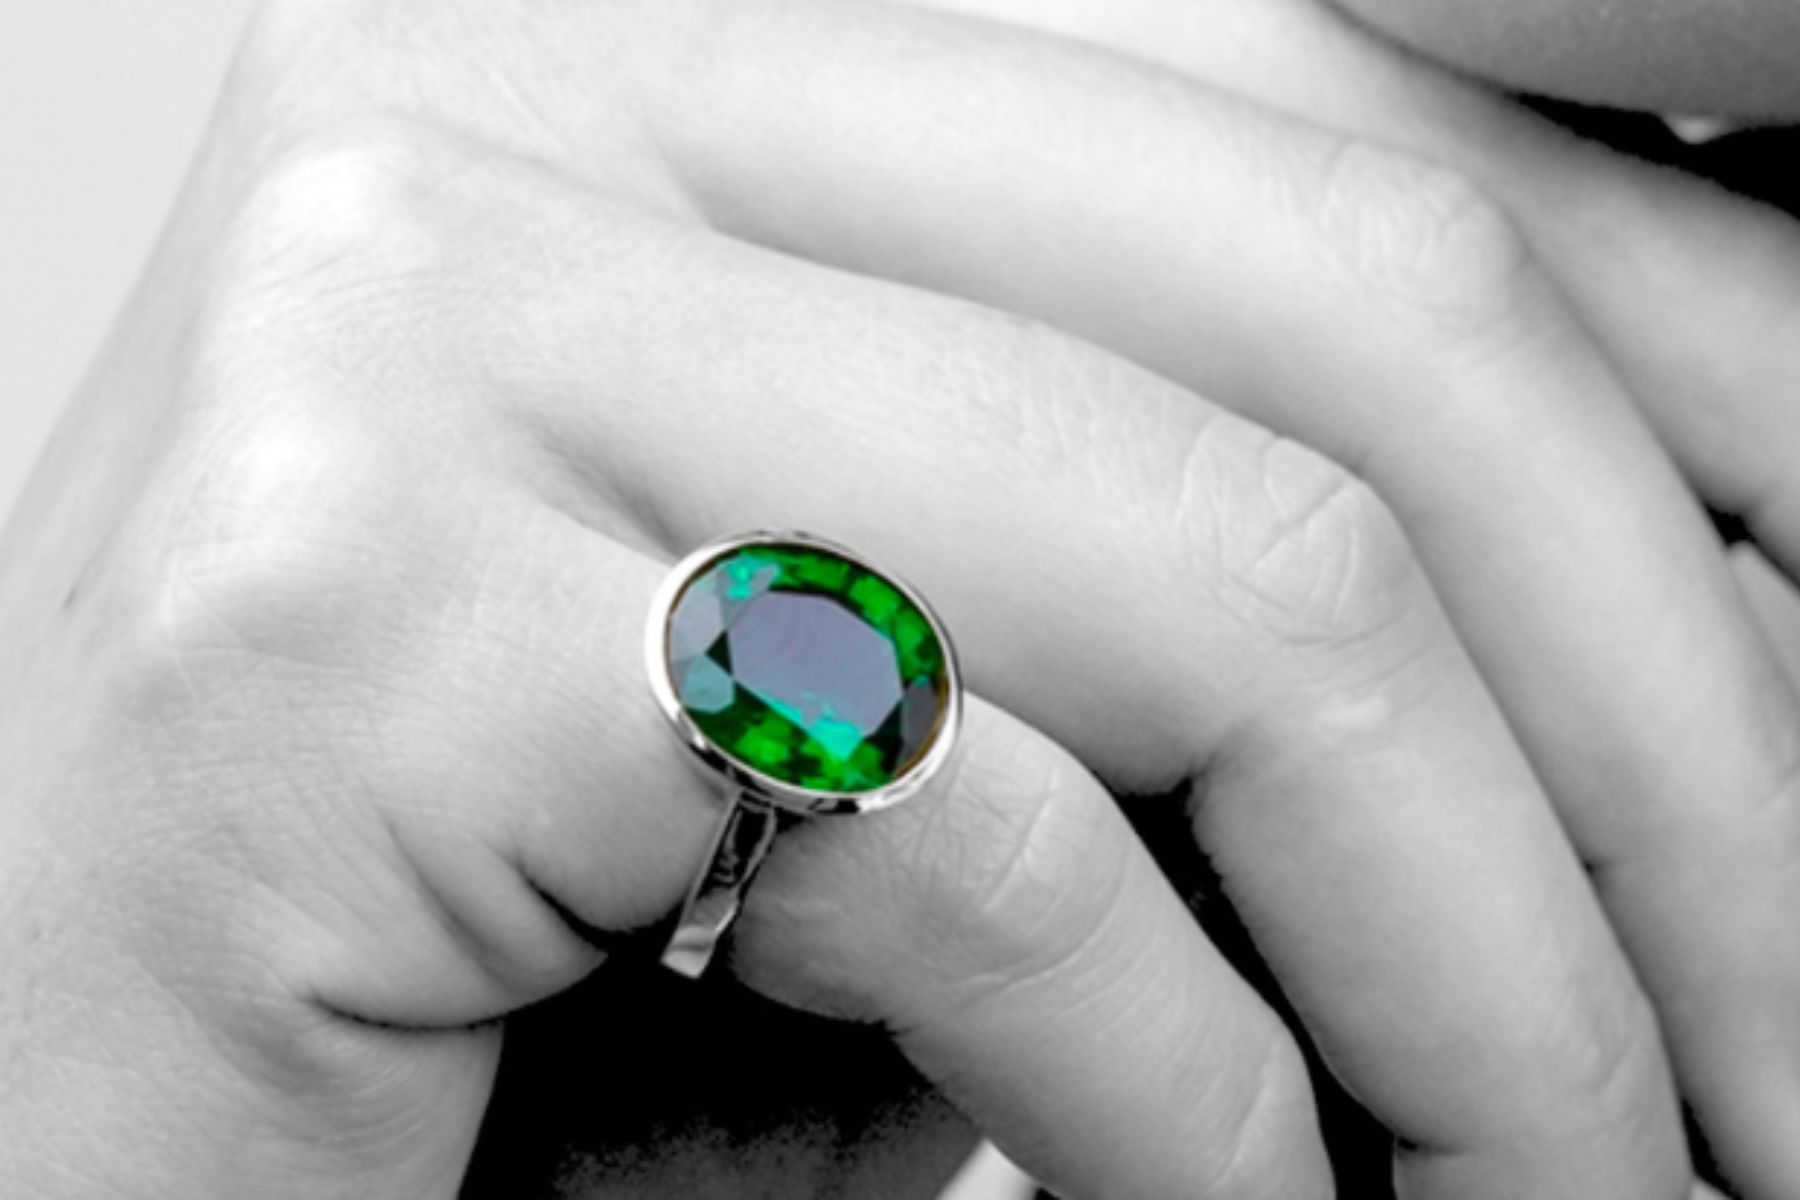 An emerald ring on the little finger